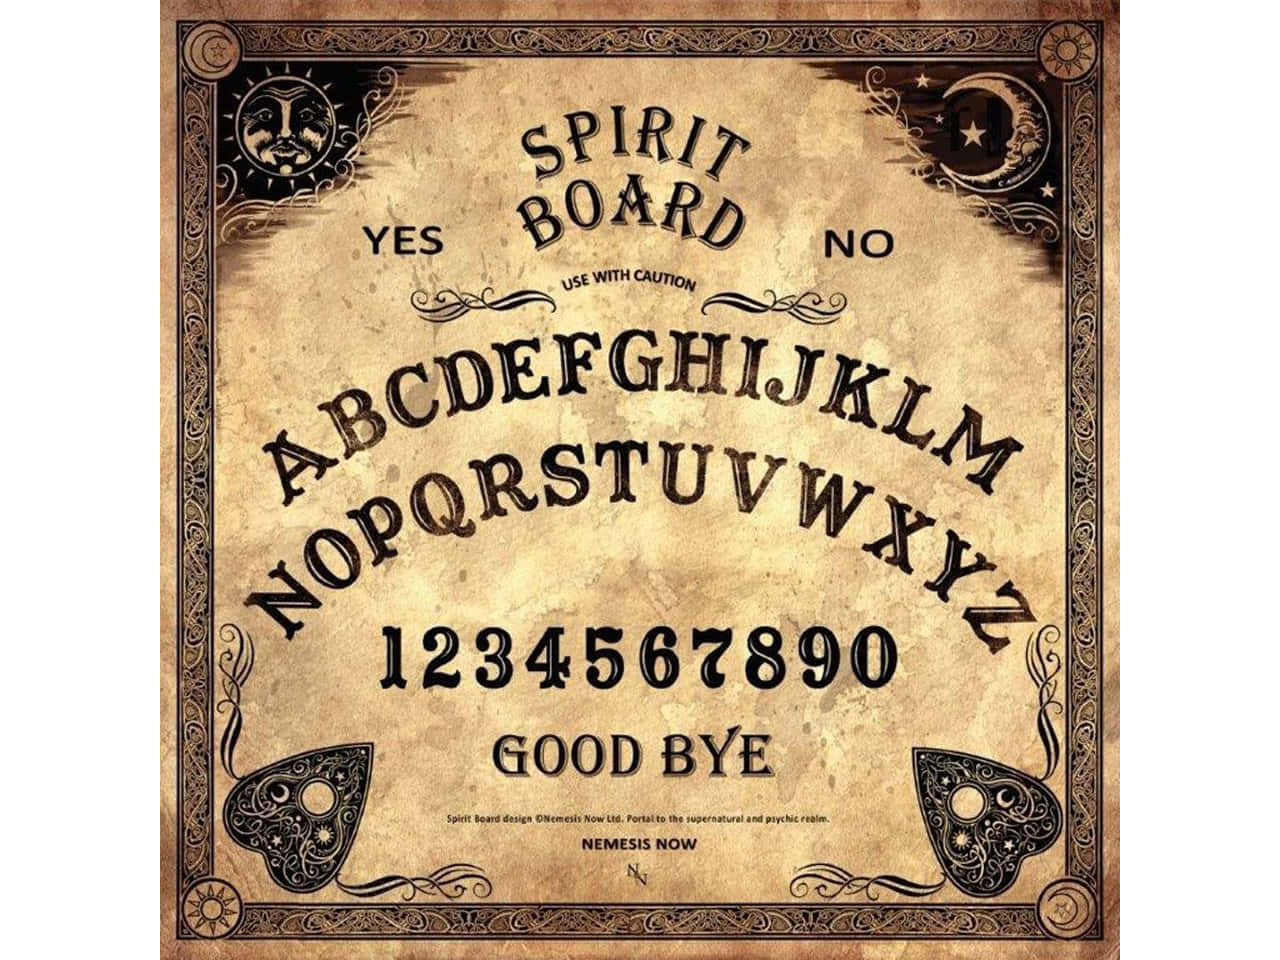 A mysterious ouija board beckons you